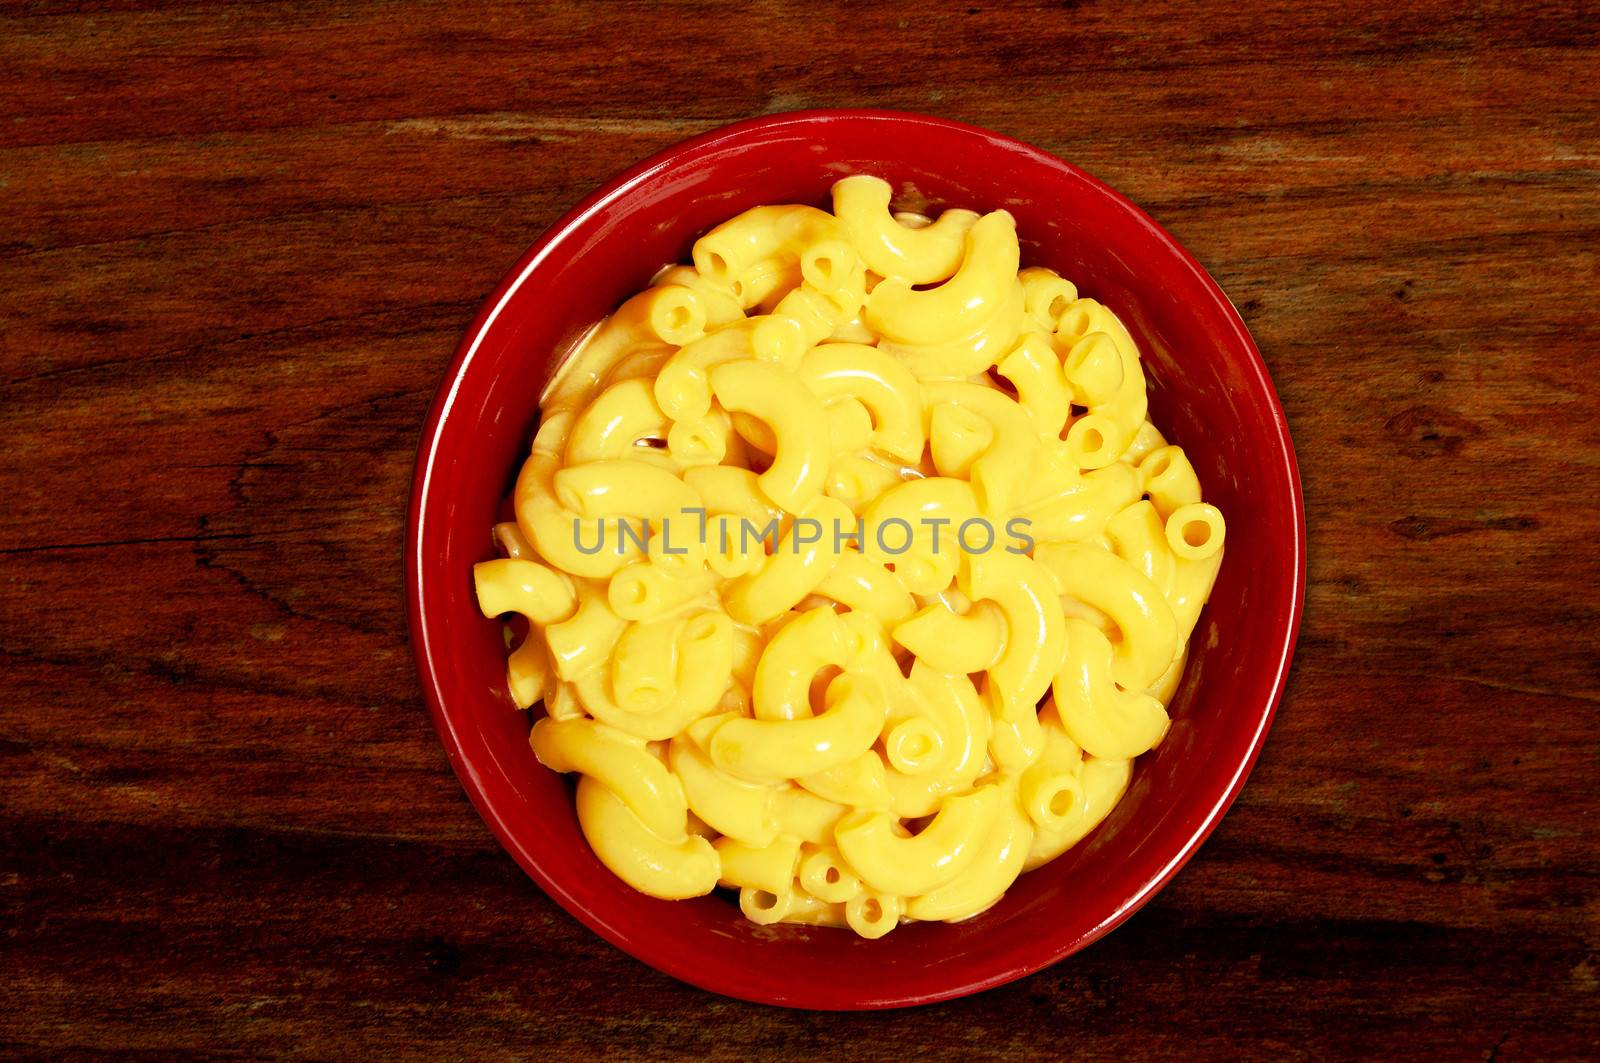 mac and cheese - cheesy pasta in red bowl on wood background